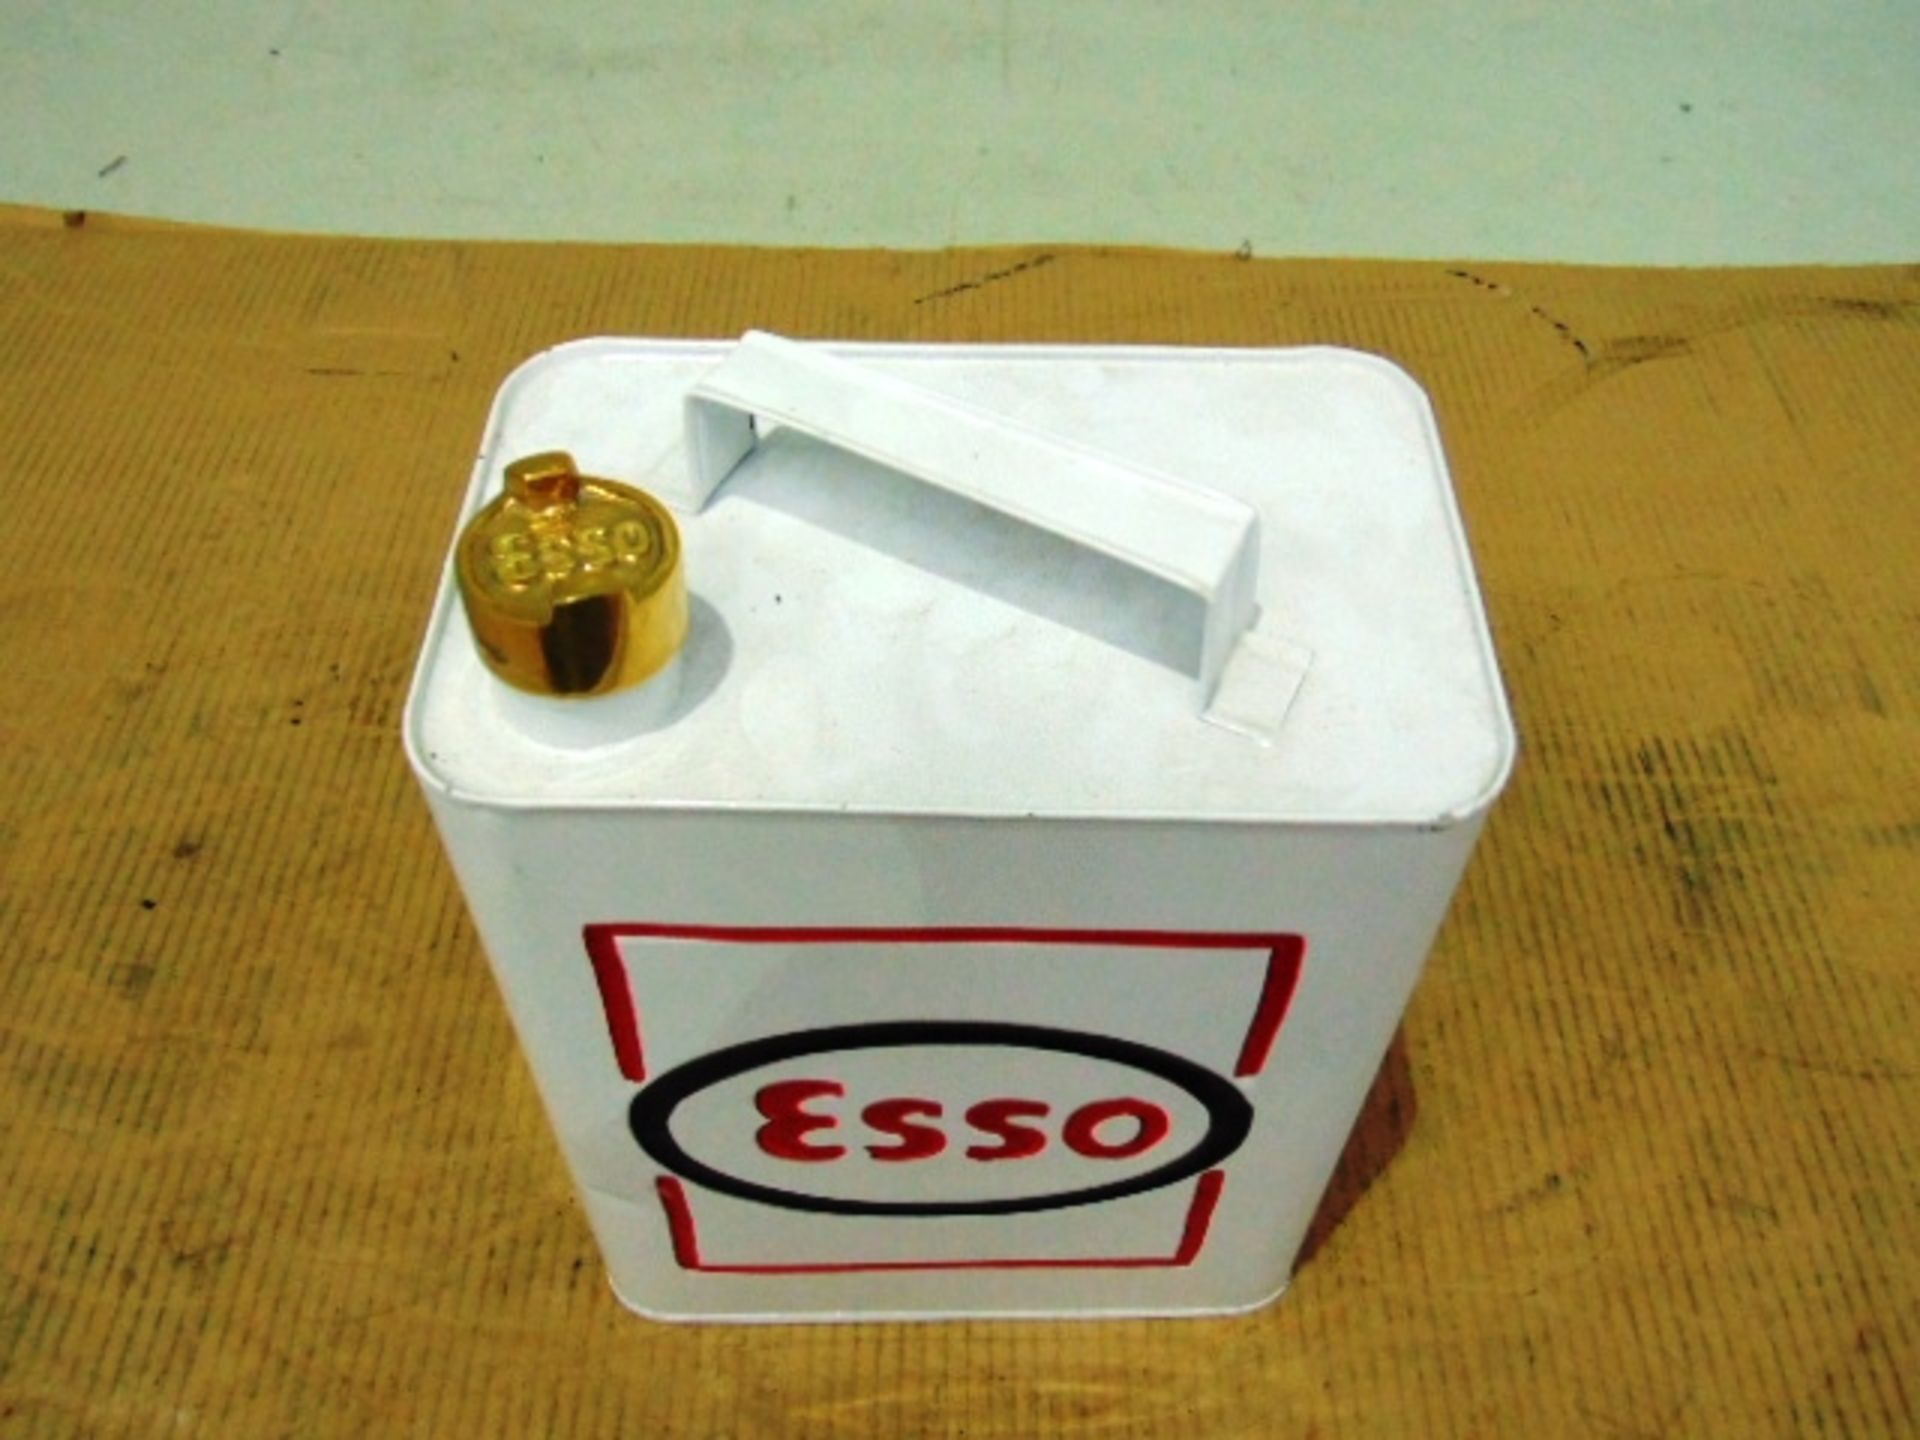 Esso Branded Oil Can - Image 4 of 6